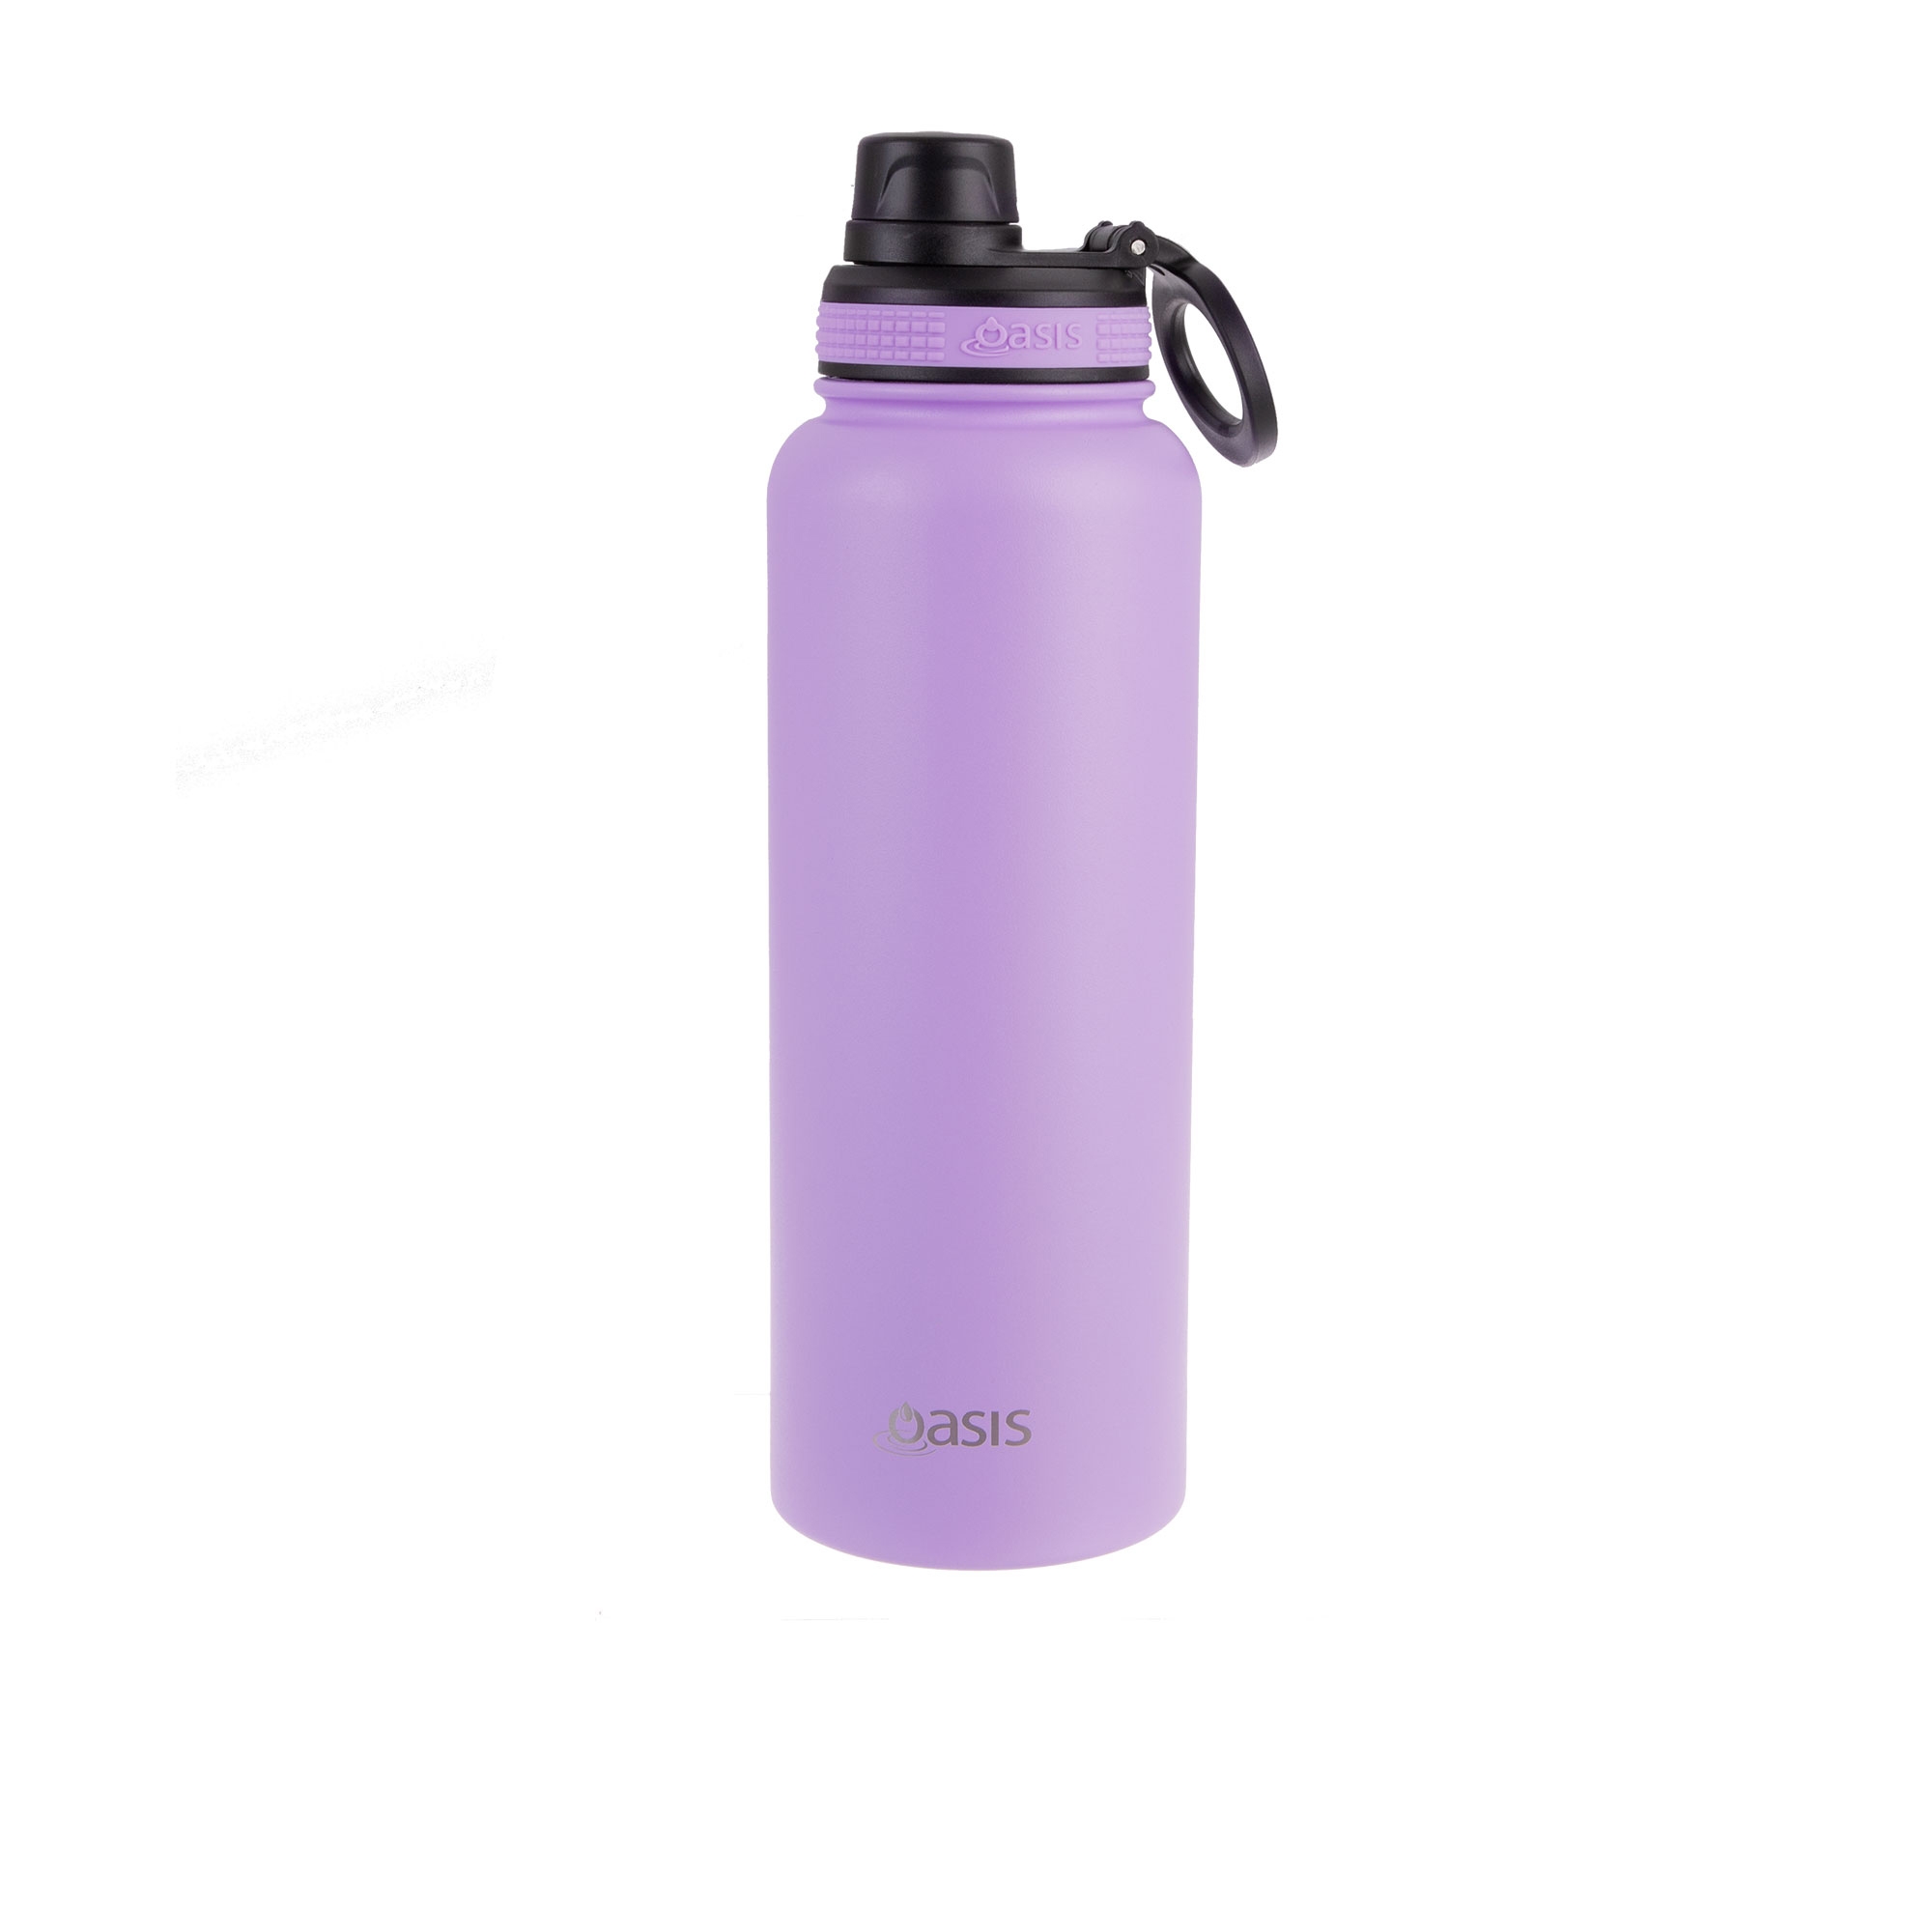 Oasis Challenger Double Wall Insulated Sports Bottle 1.1L Lavender Image 1